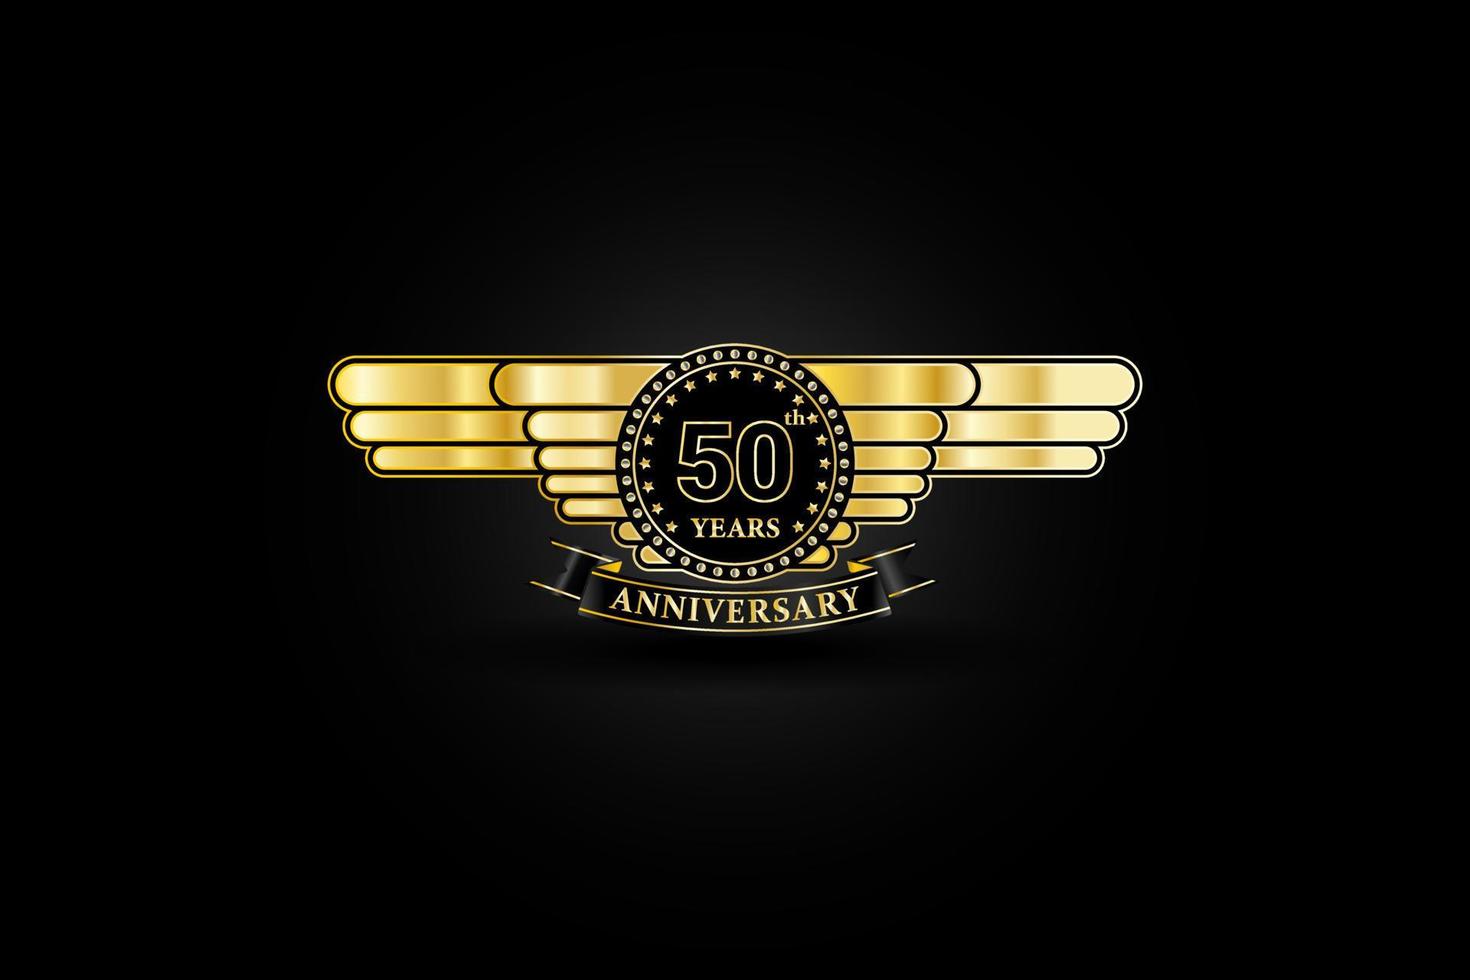 50th anniversary golden gold logo with gold wing and ribbon isolated on black background, vector design for celebration.